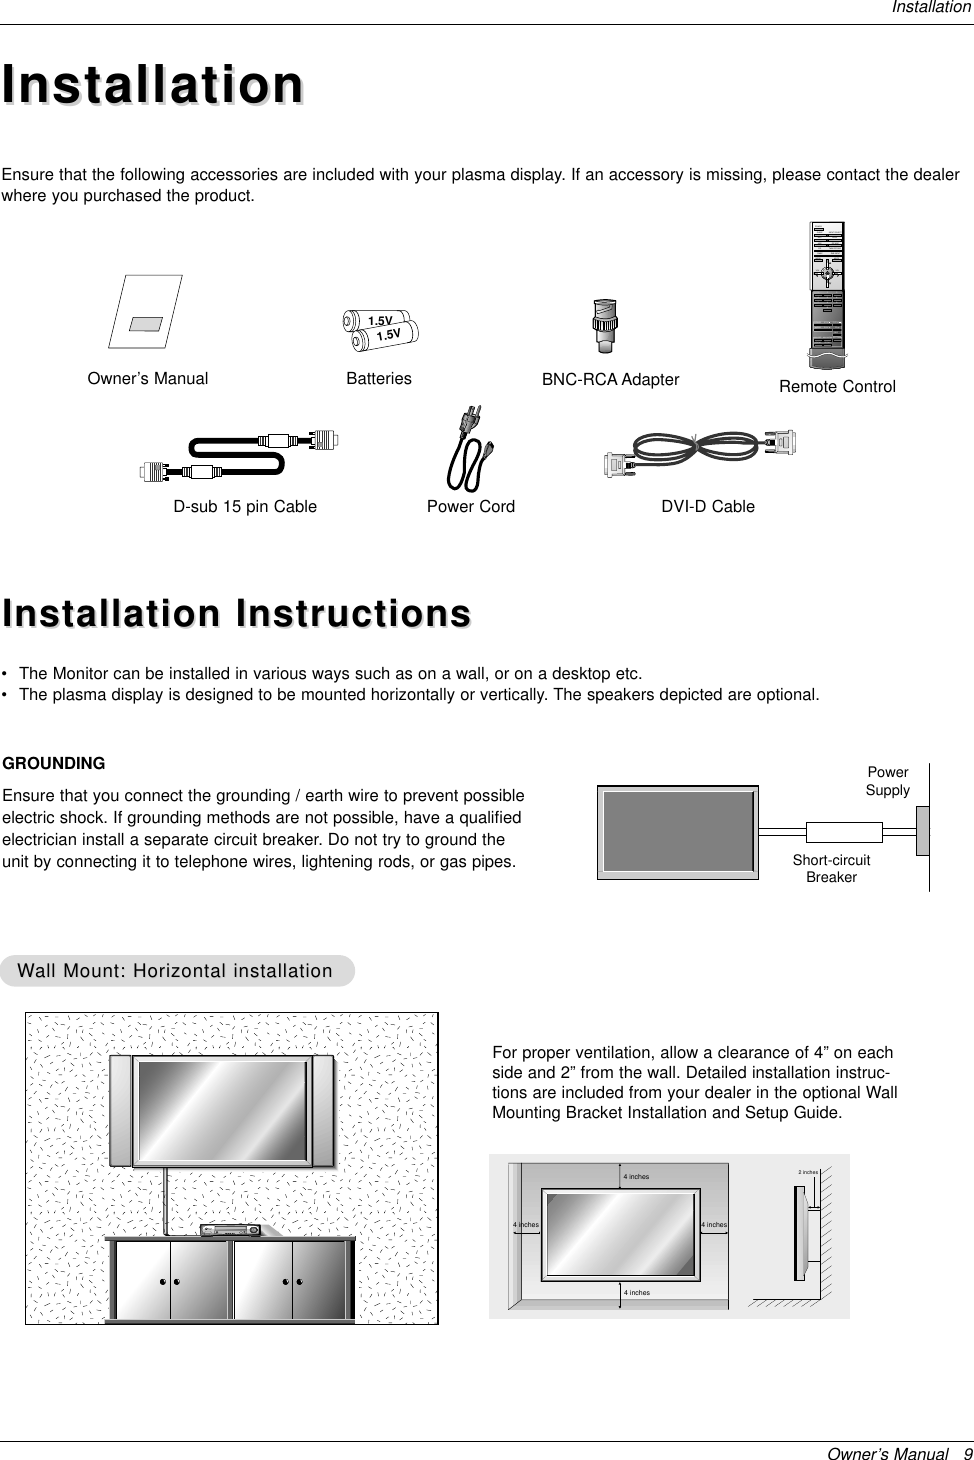 Owner’s Manual   9InstallationInstallationInstallationD-sub 15 pin CableOwner’s Manual1.5V1.5VBatteries BNC-RCA AdapterPower Cord1234567809POWERSLEEP INPUT SELECTAPC DASPARC PIP ARCPIPTWIN PICTURESWAPMENU MUTEOKVOLPOWER STOPPLAY FFRECREWP/STILLWIN.SIZEWIN.POSITIONZOOM +ZOOM -SPLIT ZOOMVOLSUB INPUTRemote ControlDVI-D CableEnsure that the following accessories are included with your plasma display. If an accessory is missing, please contact the dealerwhere you purchased the product.Installation InstructionsInstallation Instructions•The Monitor can be installed in various ways such as on a wall, or on a desktop etc.•The plasma display is designed to be mounted horizontally or vertically. The speakers depicted are optional.GROUNDINGEnsure that you connect the grounding / earth wire to prevent possibleelectric shock. If grounding methods are not possible, have a qualifiedelectrician install a separate circuit breaker. Do not try to ground theunit by connecting it to telephone wires, lightening rods, or gas pipes.PowerSupplyShort-circuitBreakerWWall Mount: Horizontal installationall Mount: Horizontal installationFor proper ventilation, allow a clearance of 4” on eachside and 2” from the wall. Detailed installation instruc-tions are included from your dealer in the optional WallMounting Bracket Installation and Setup Guide.4 inches4 inches4 inches4 inches2 inches